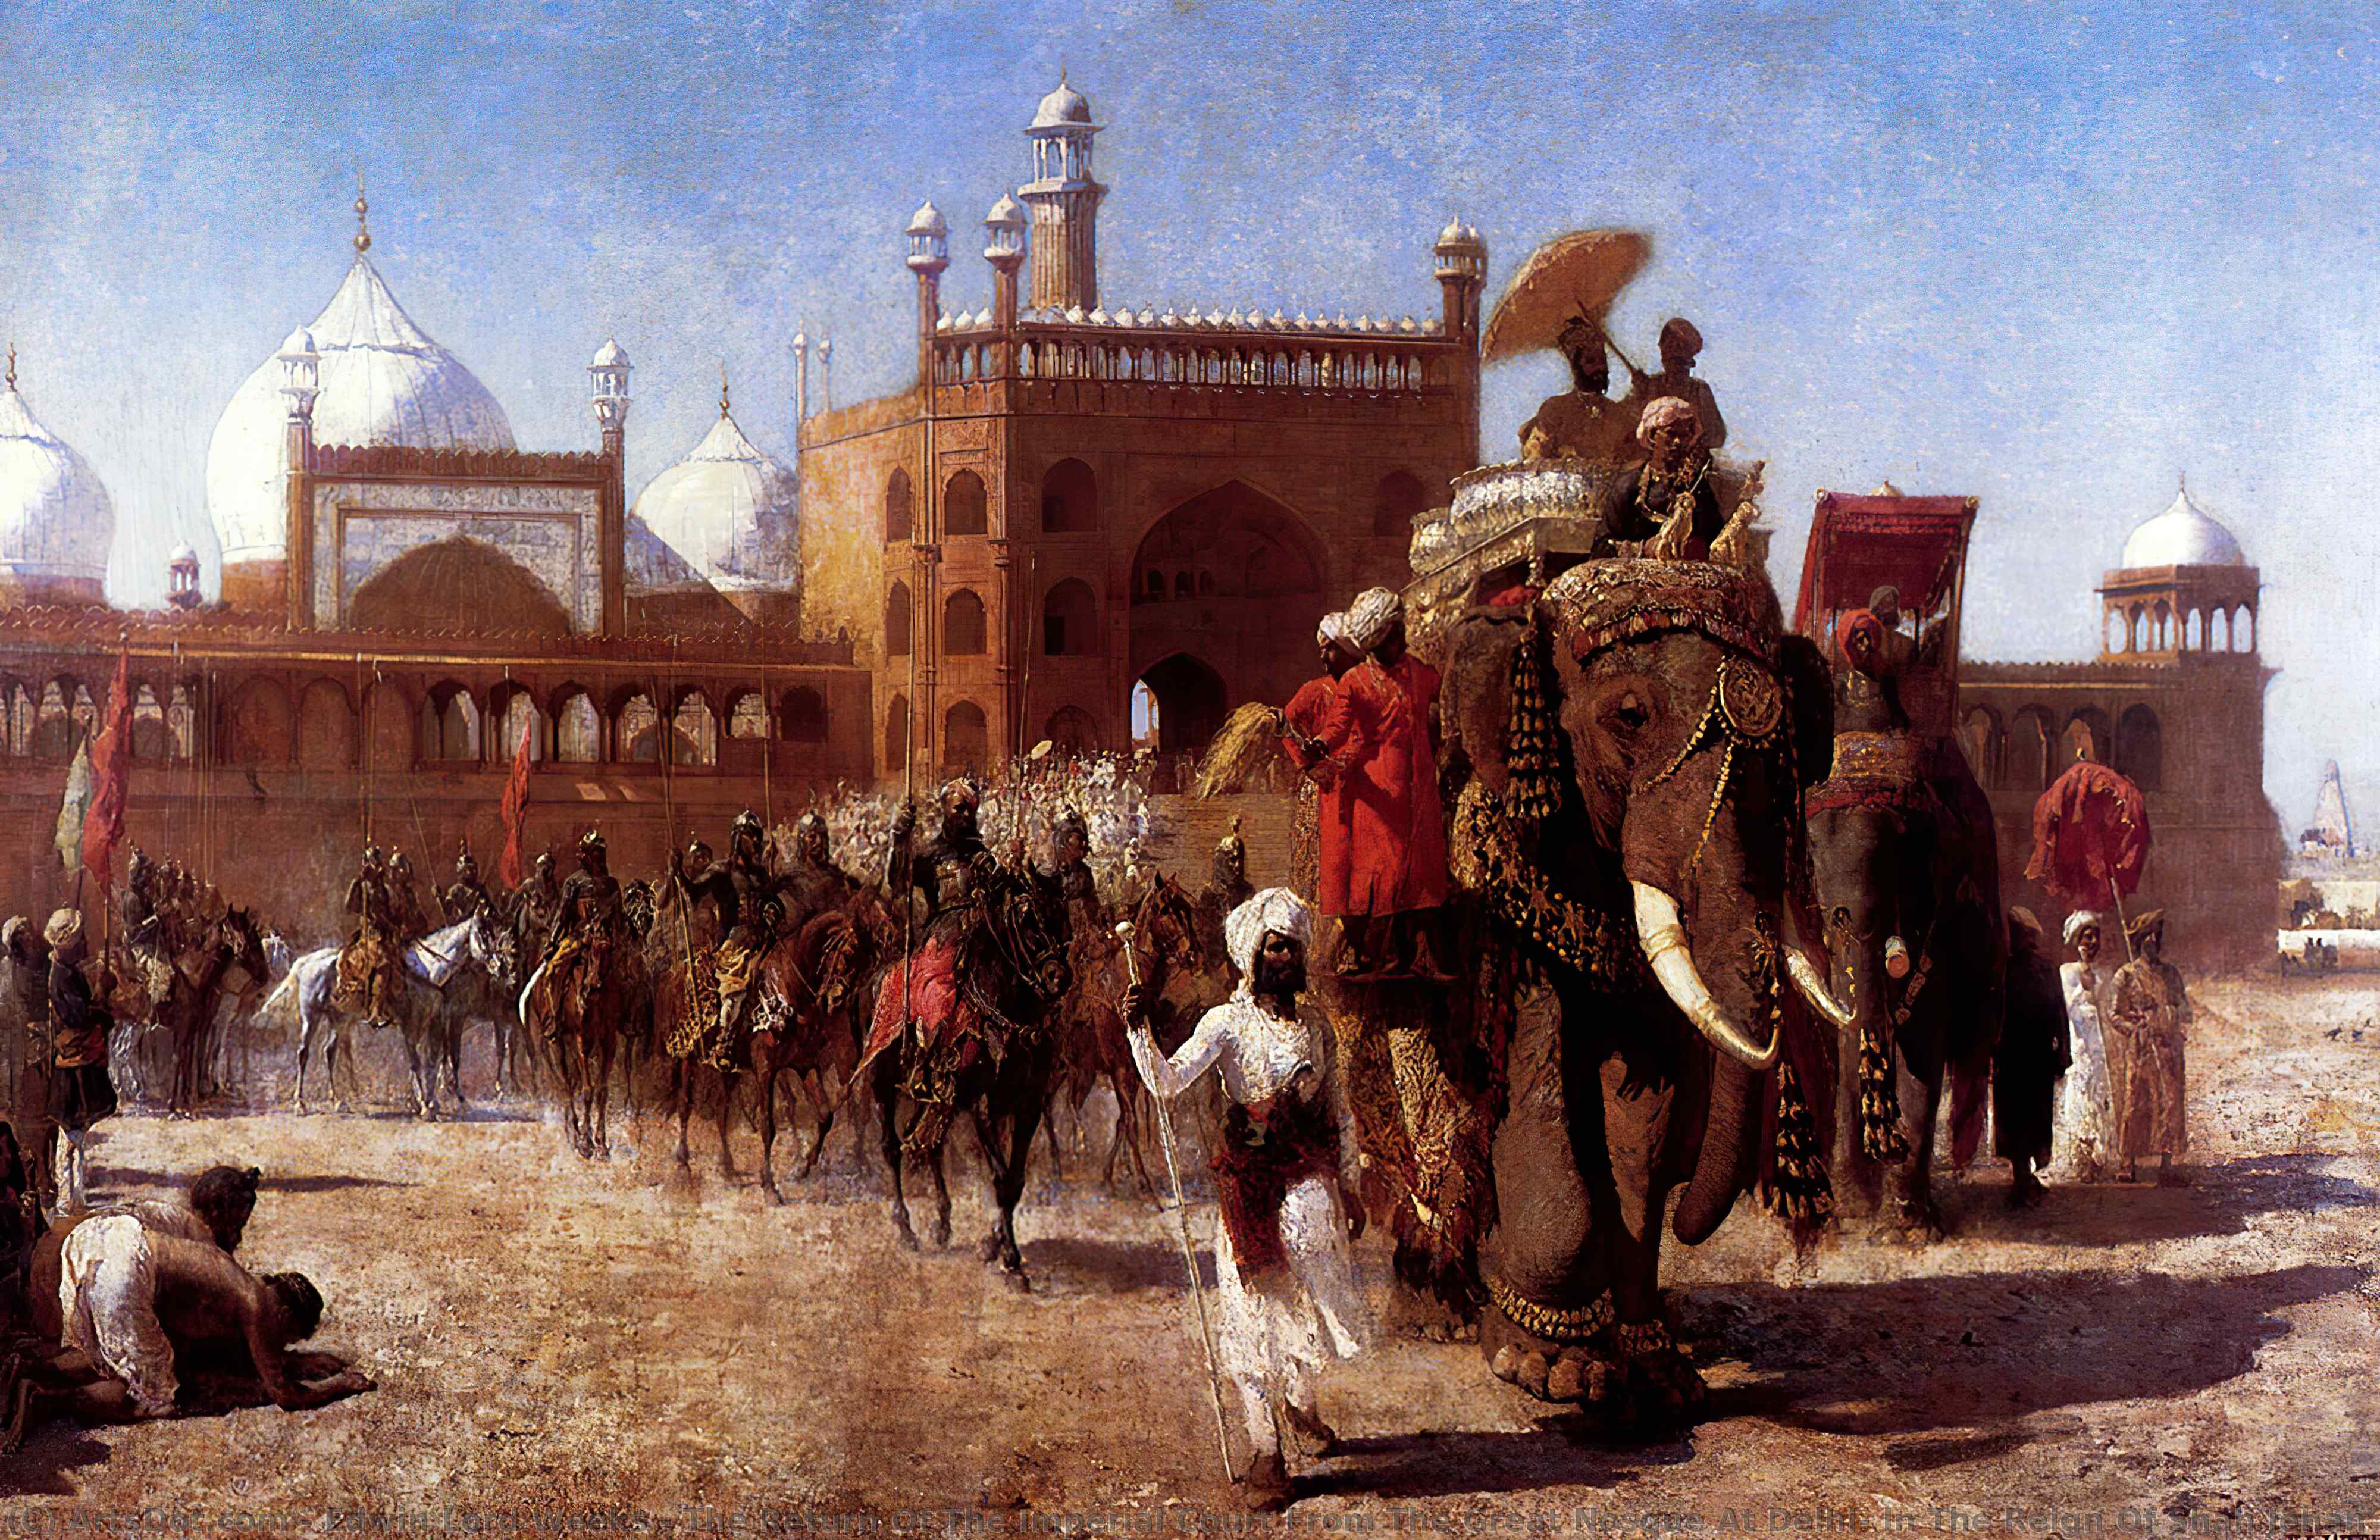 Order Oil Painting Replica The Return Of The Imperial Court From The Great Mosque At Delhi, In The Reign Of Shah Jehan by Edwin Lord Weeks (1849-1903, United States) | ArtsDot.com